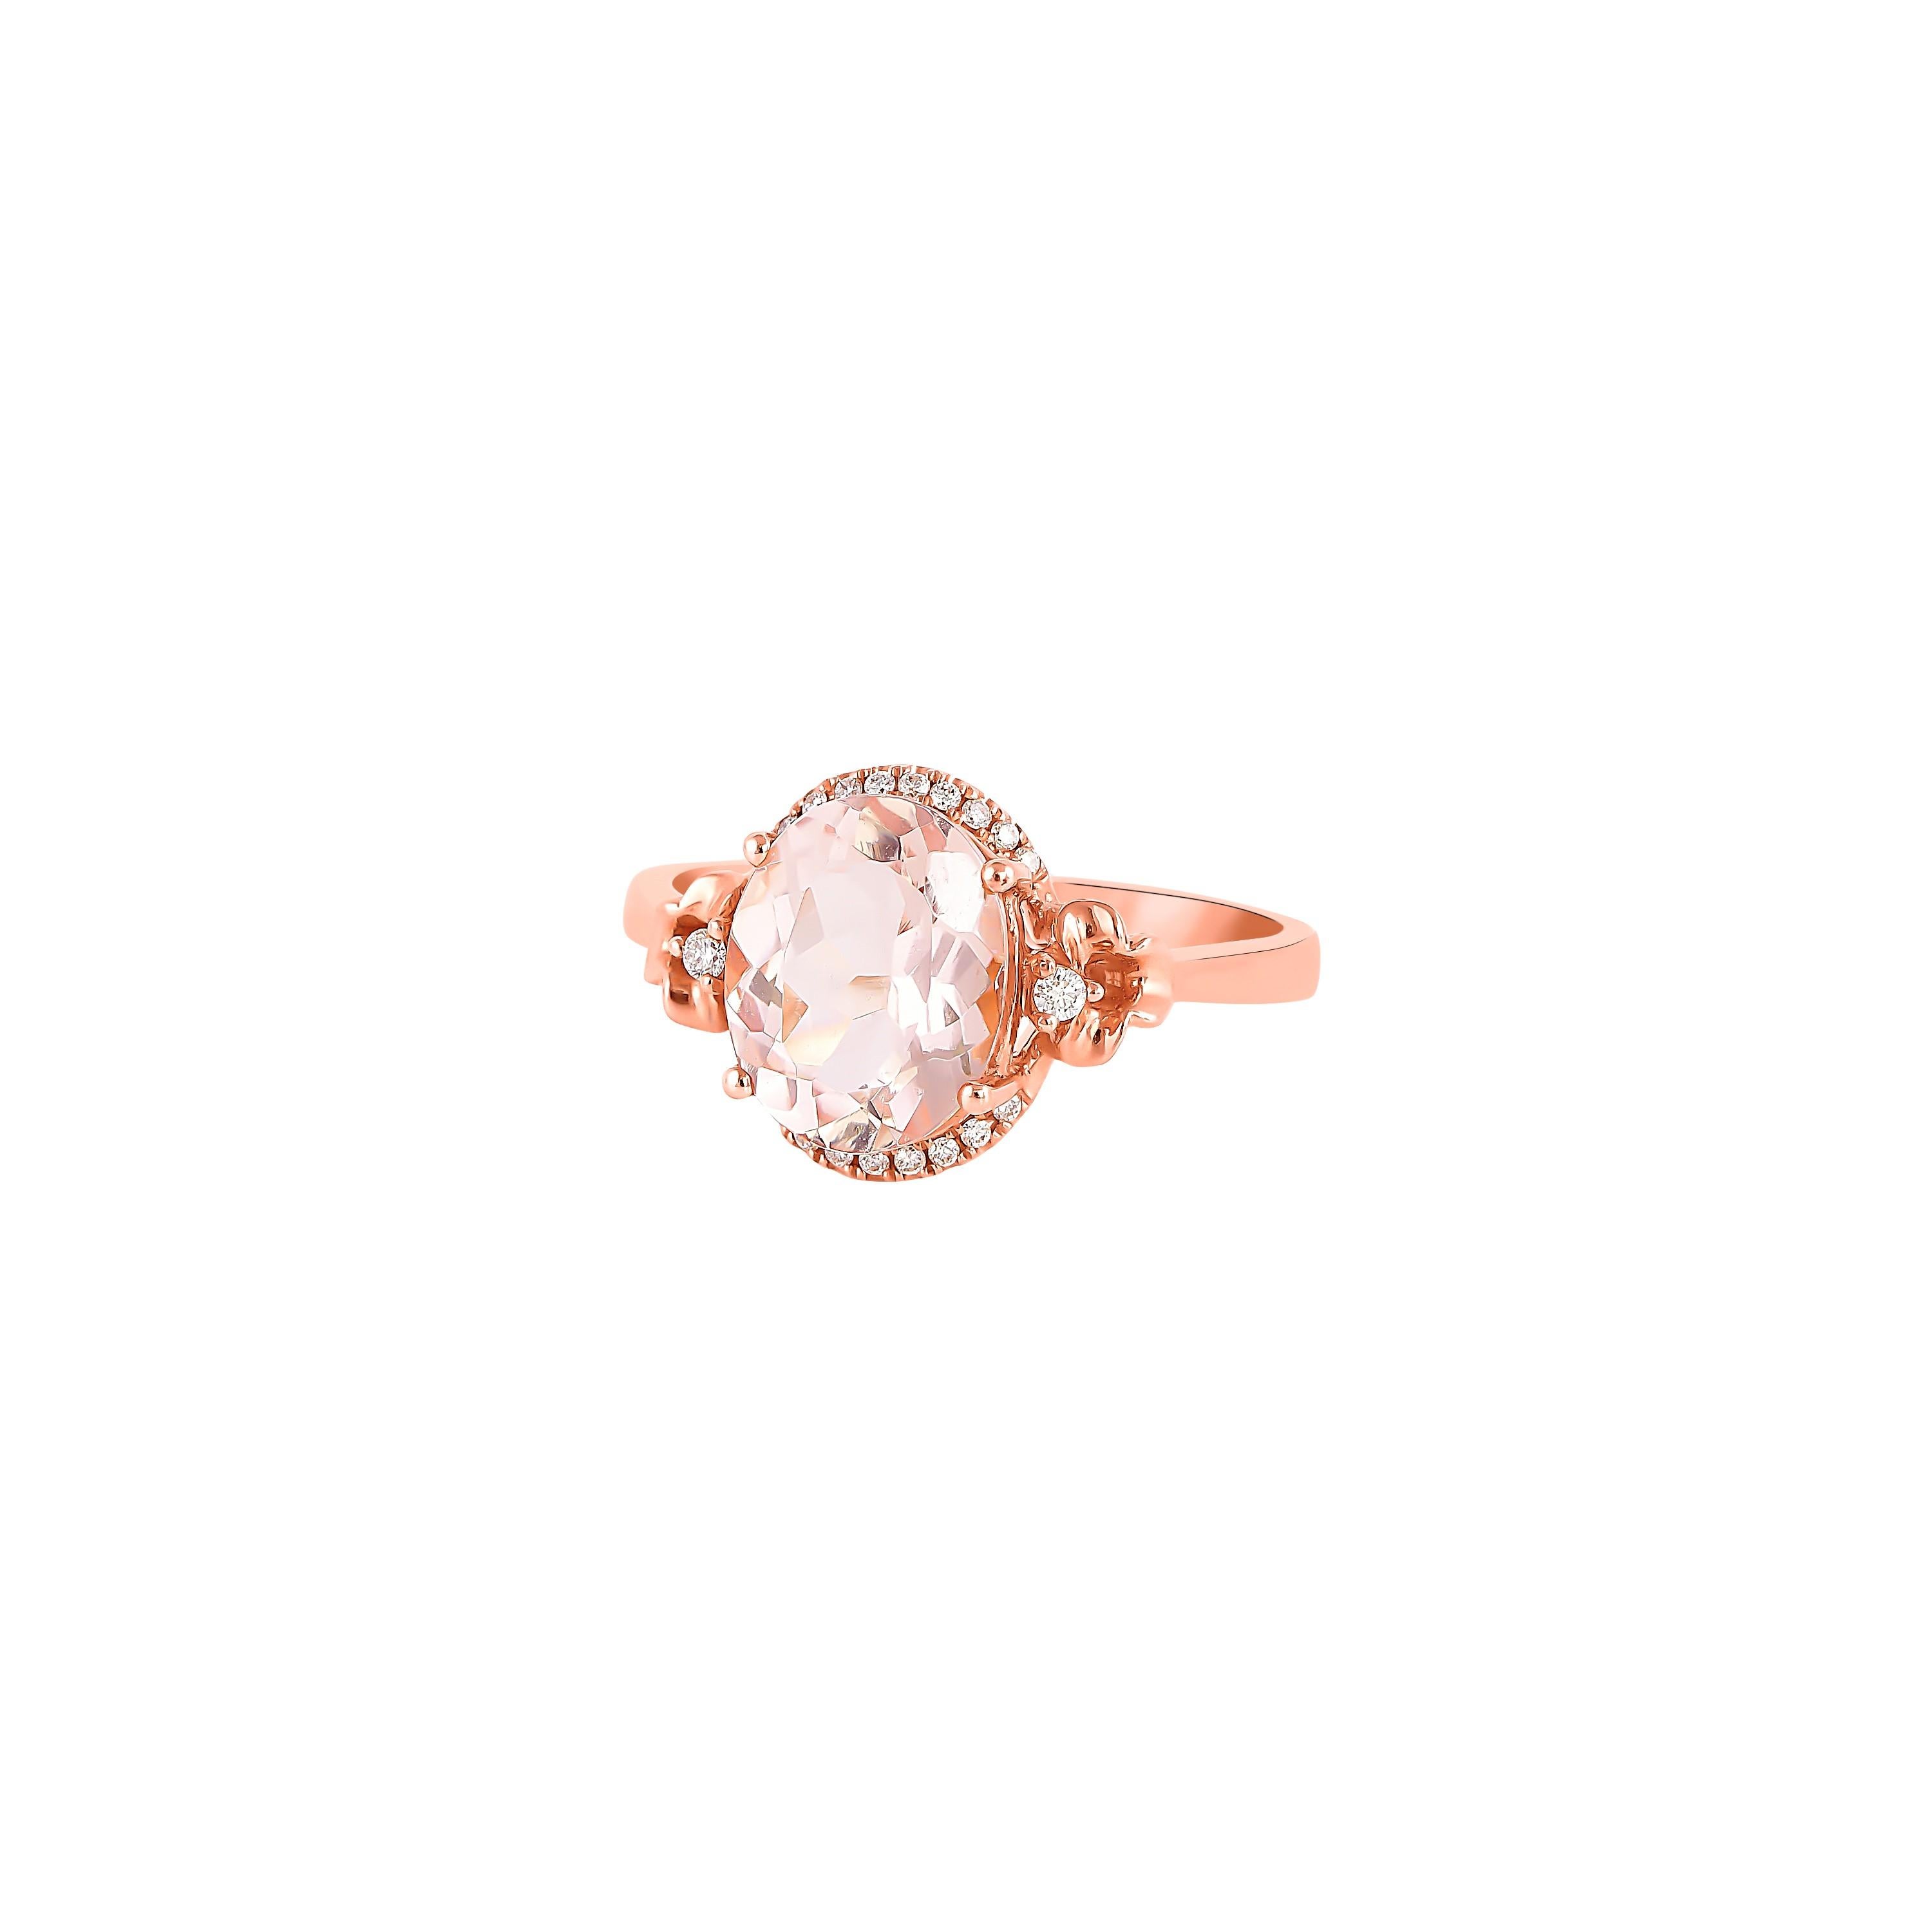 Oval Cut 2.33 Carat Morganite and Diamond Ring in 18 Karat Rose Gold For Sale